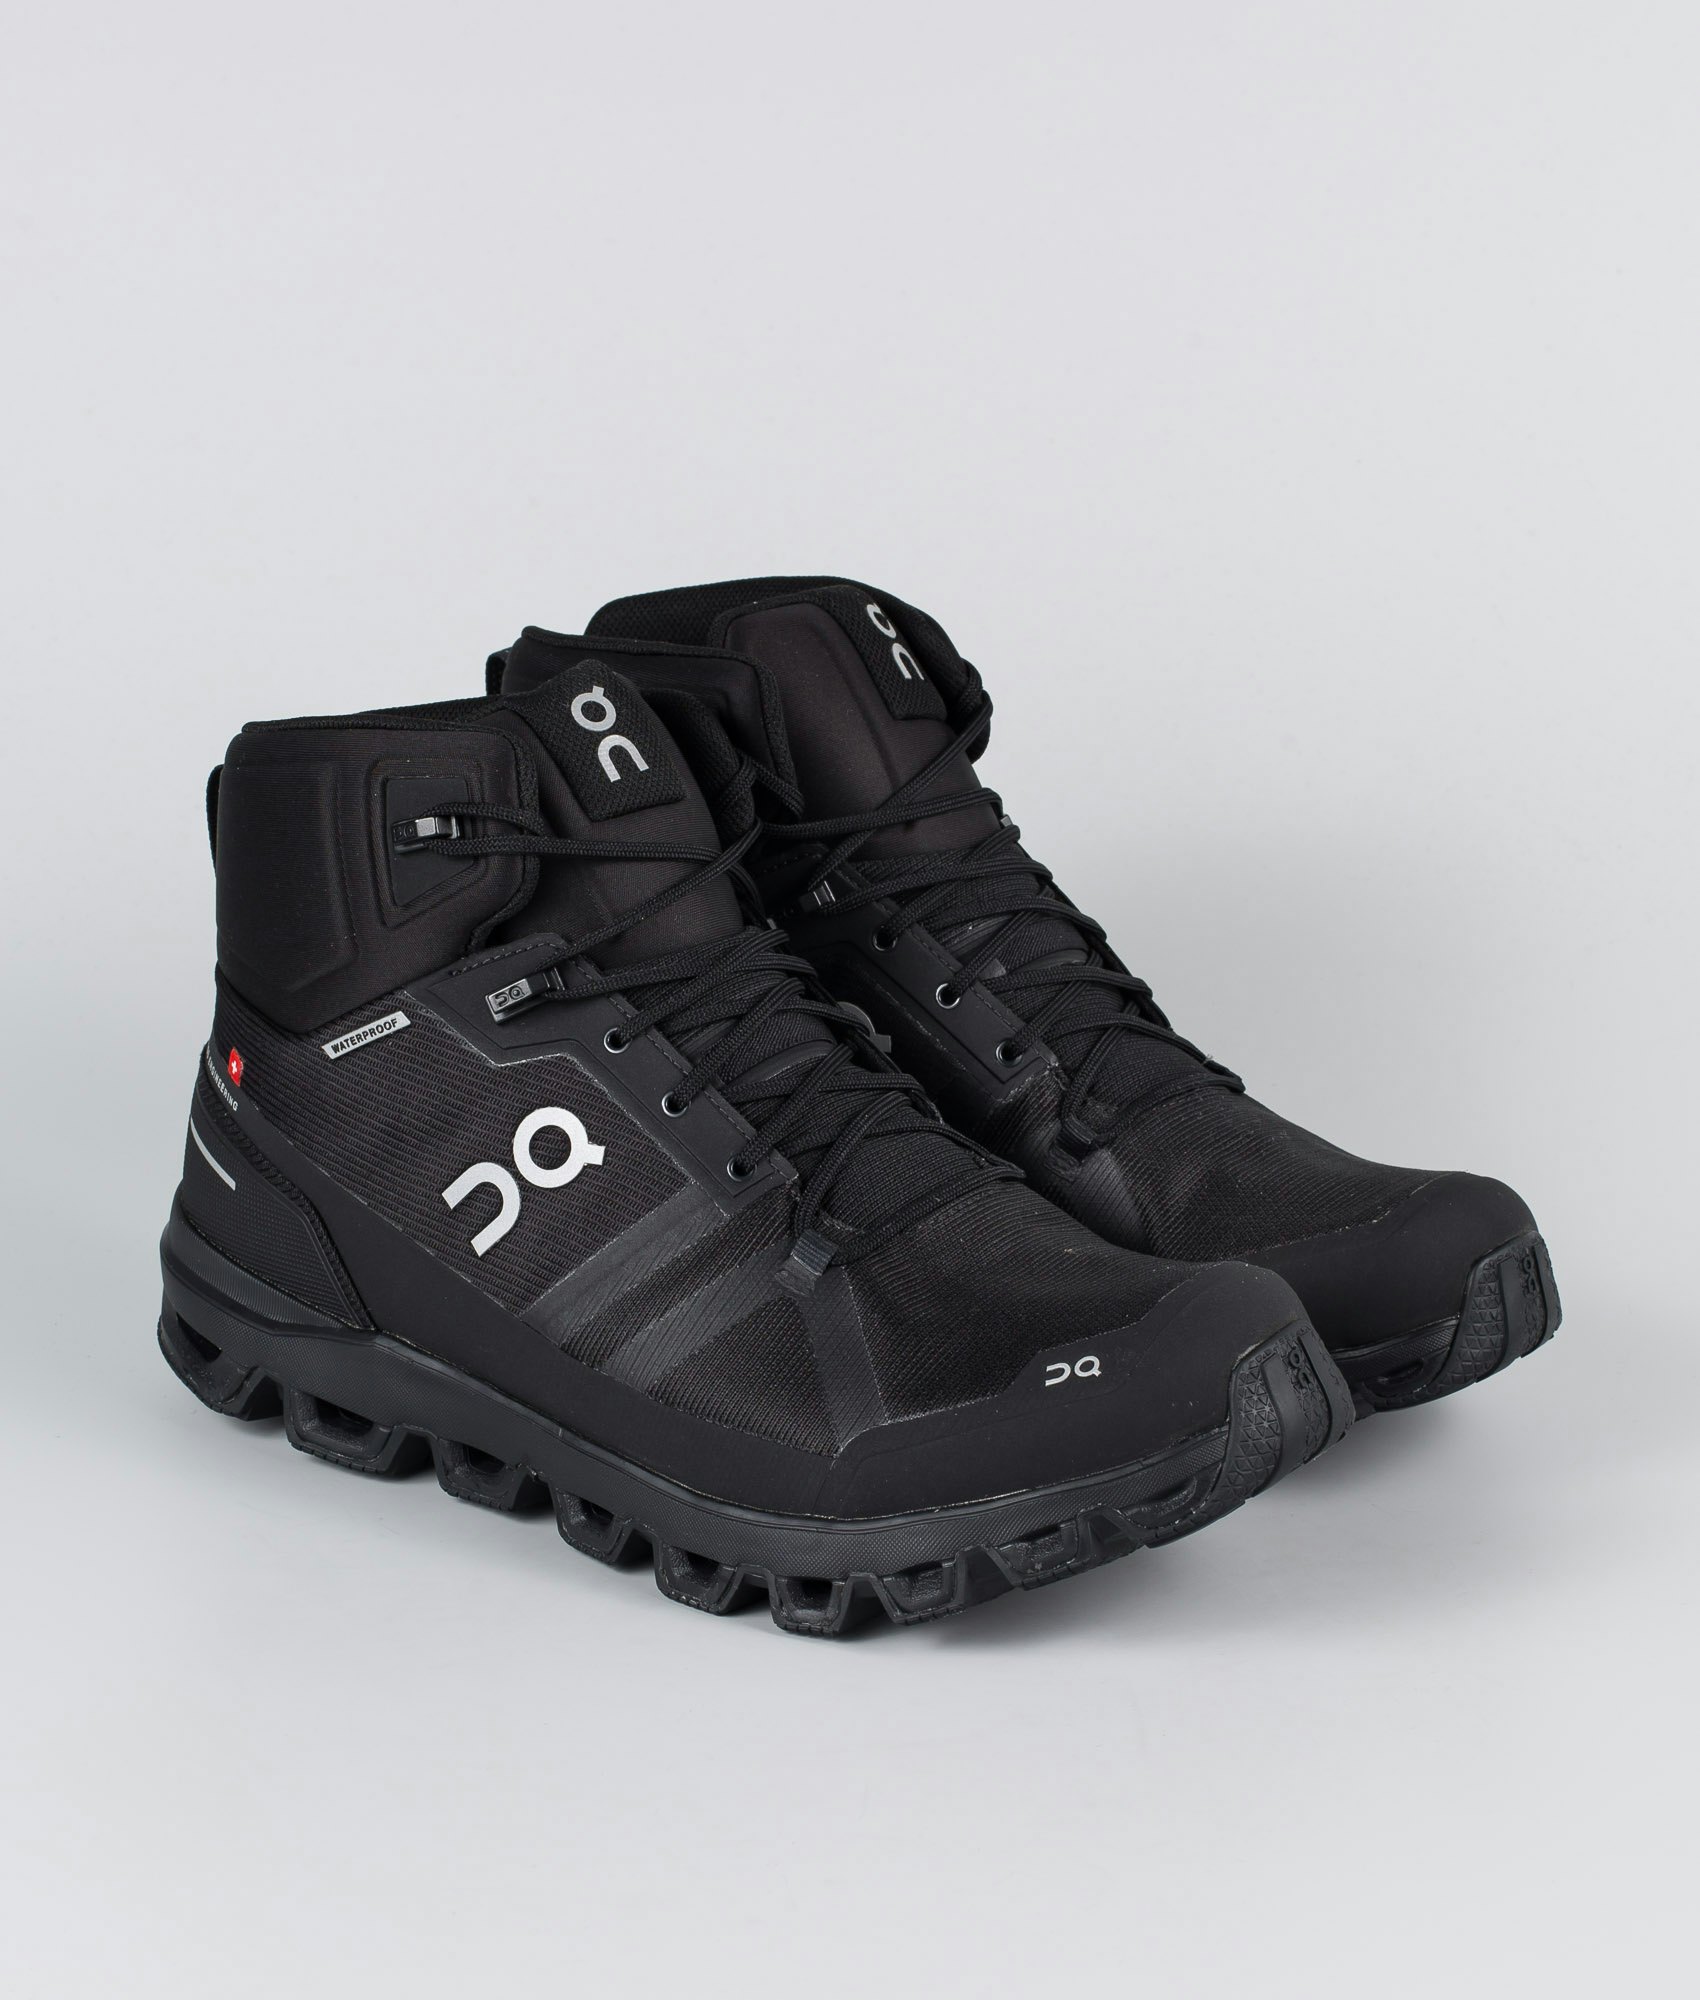 onshoes hiking boot